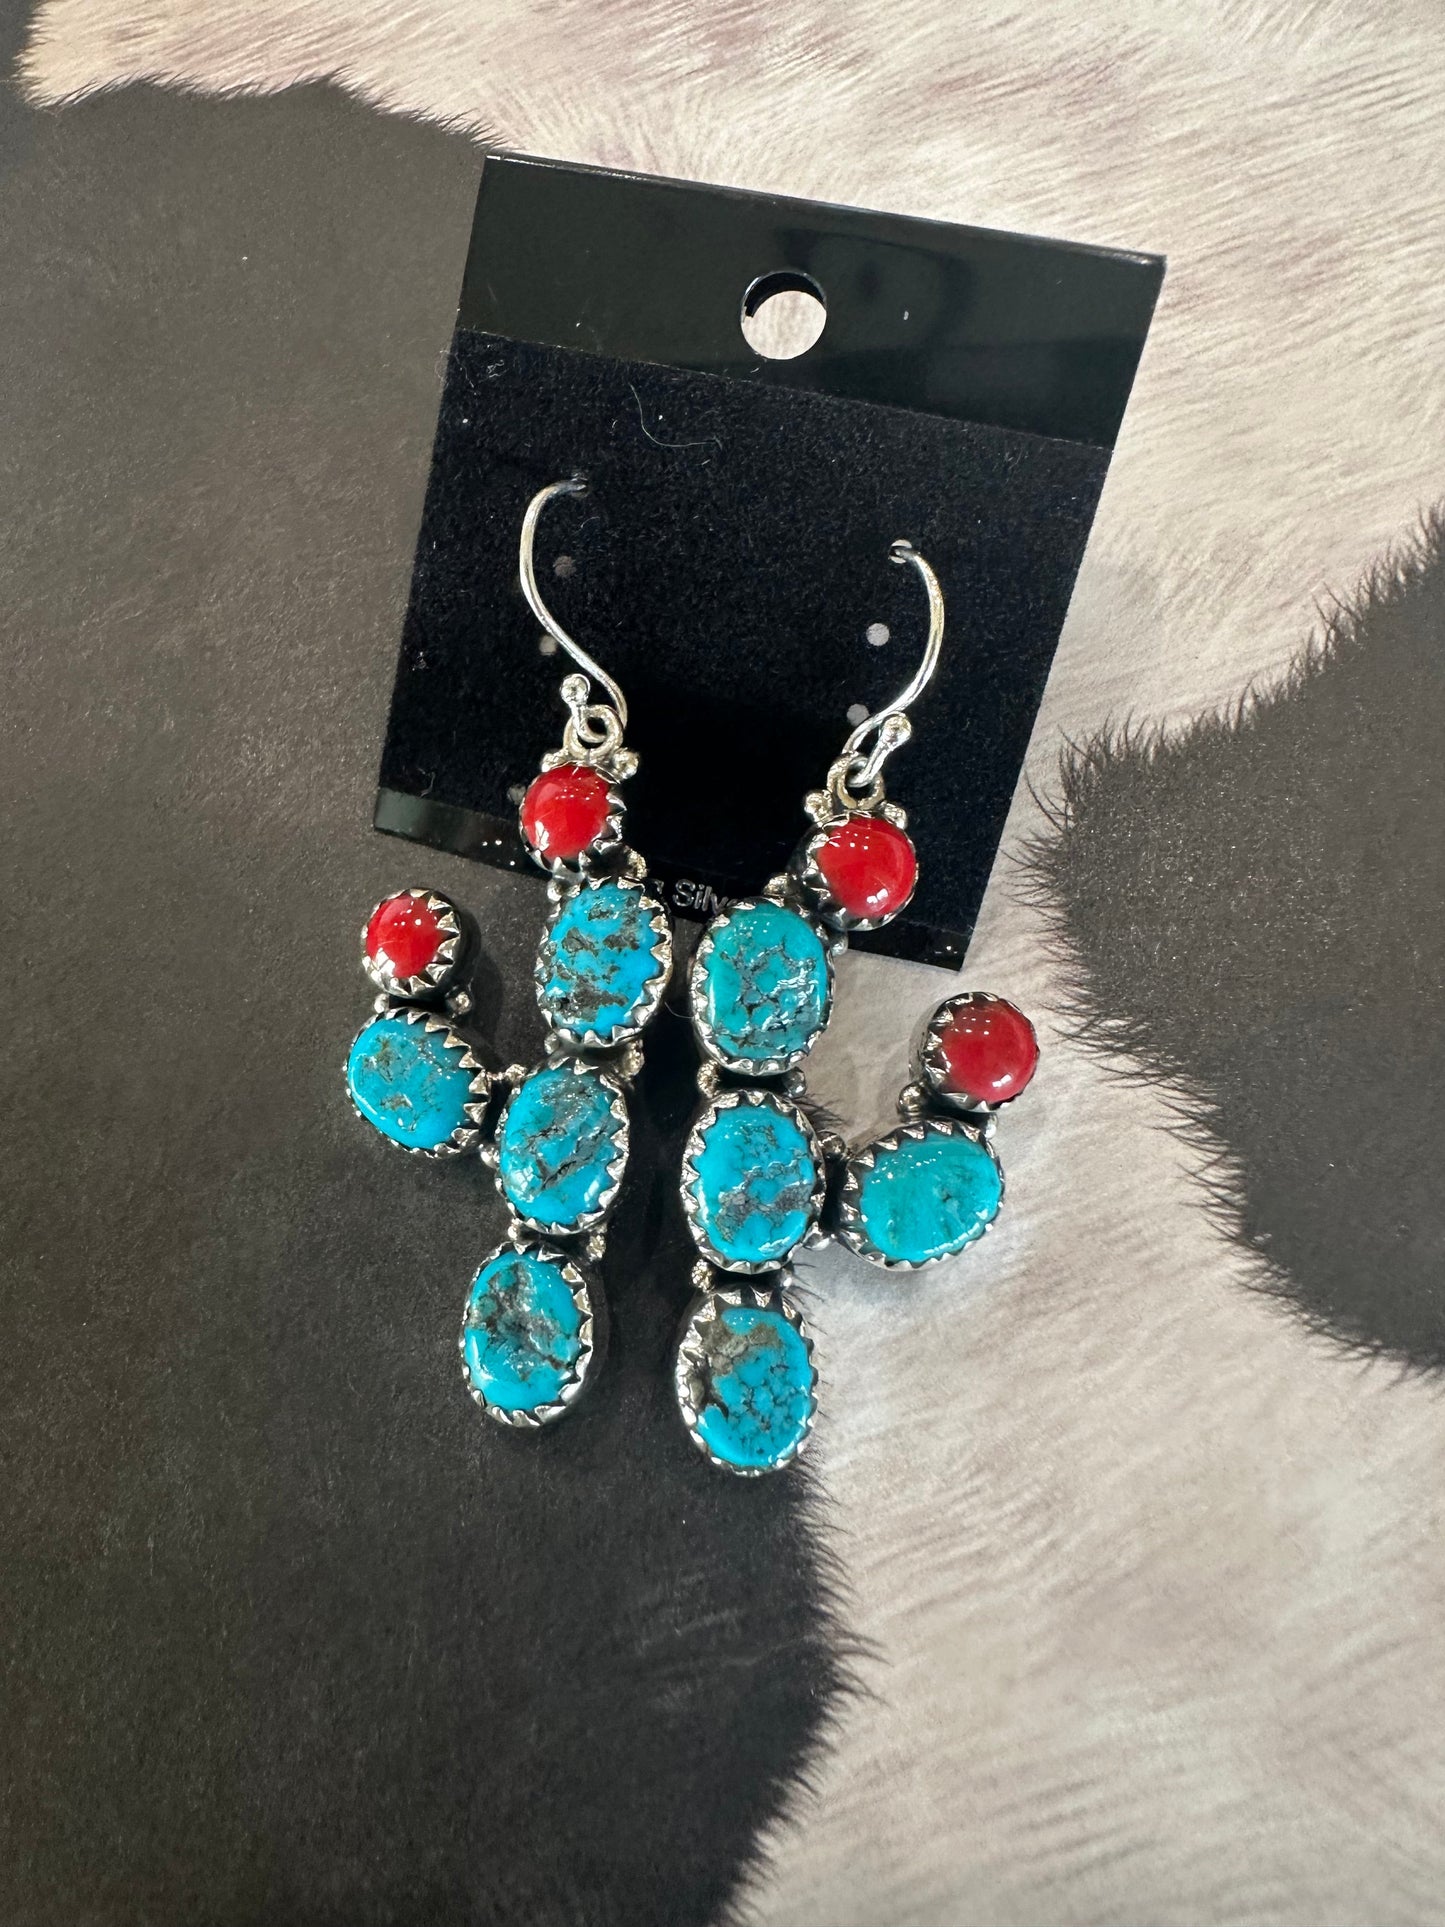 Sterling Silver, Turquoise & Coral Cactus Earrings Signed Zia